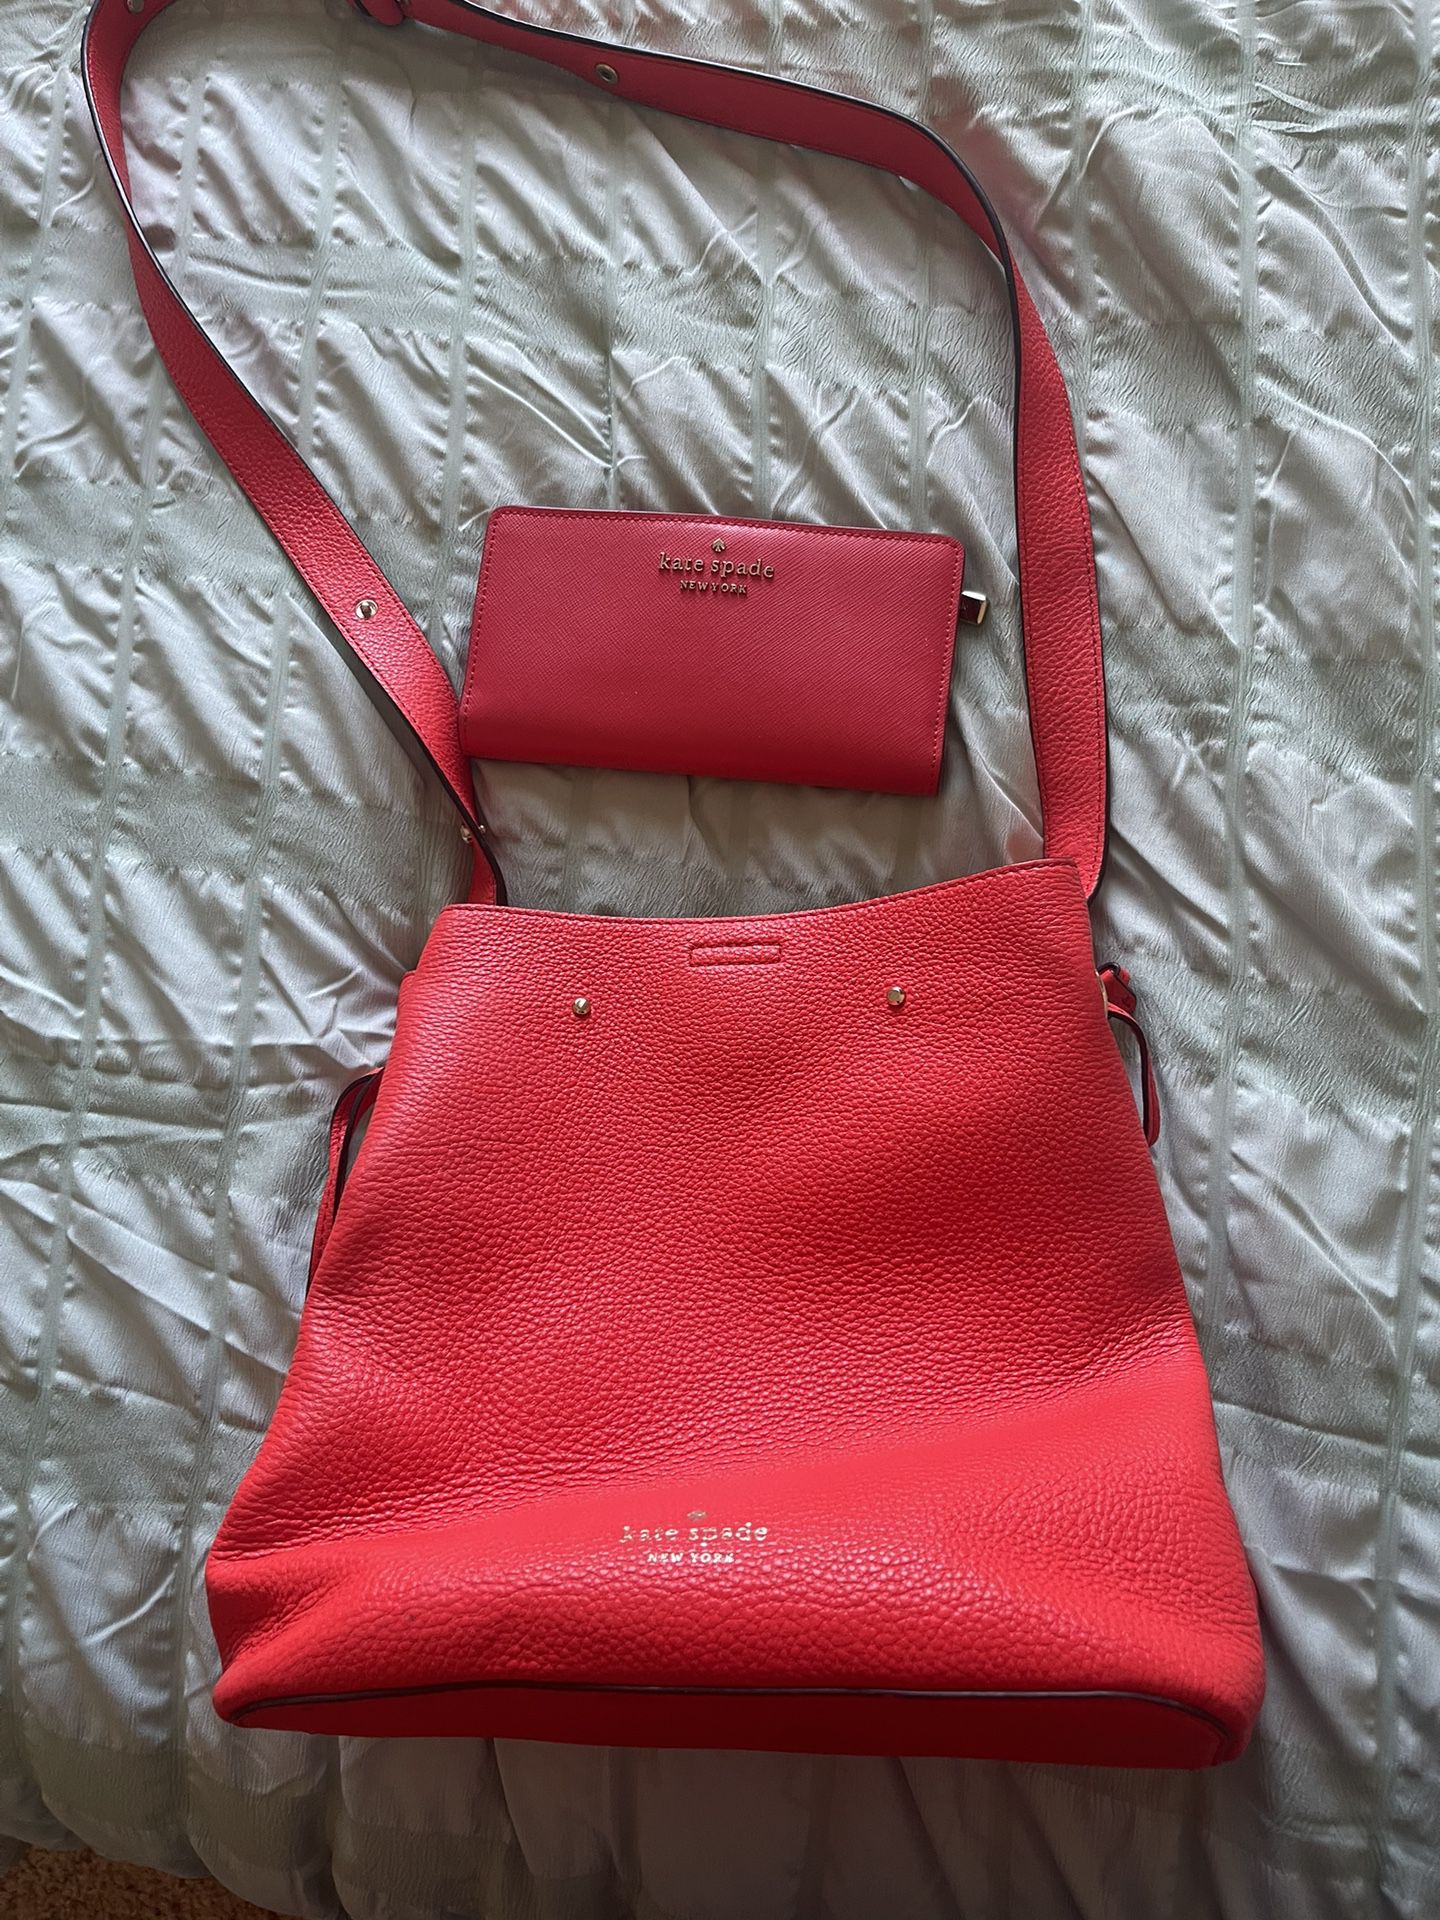 Kate Spade Purse & Matching Wallet (color:  Hydrangea)